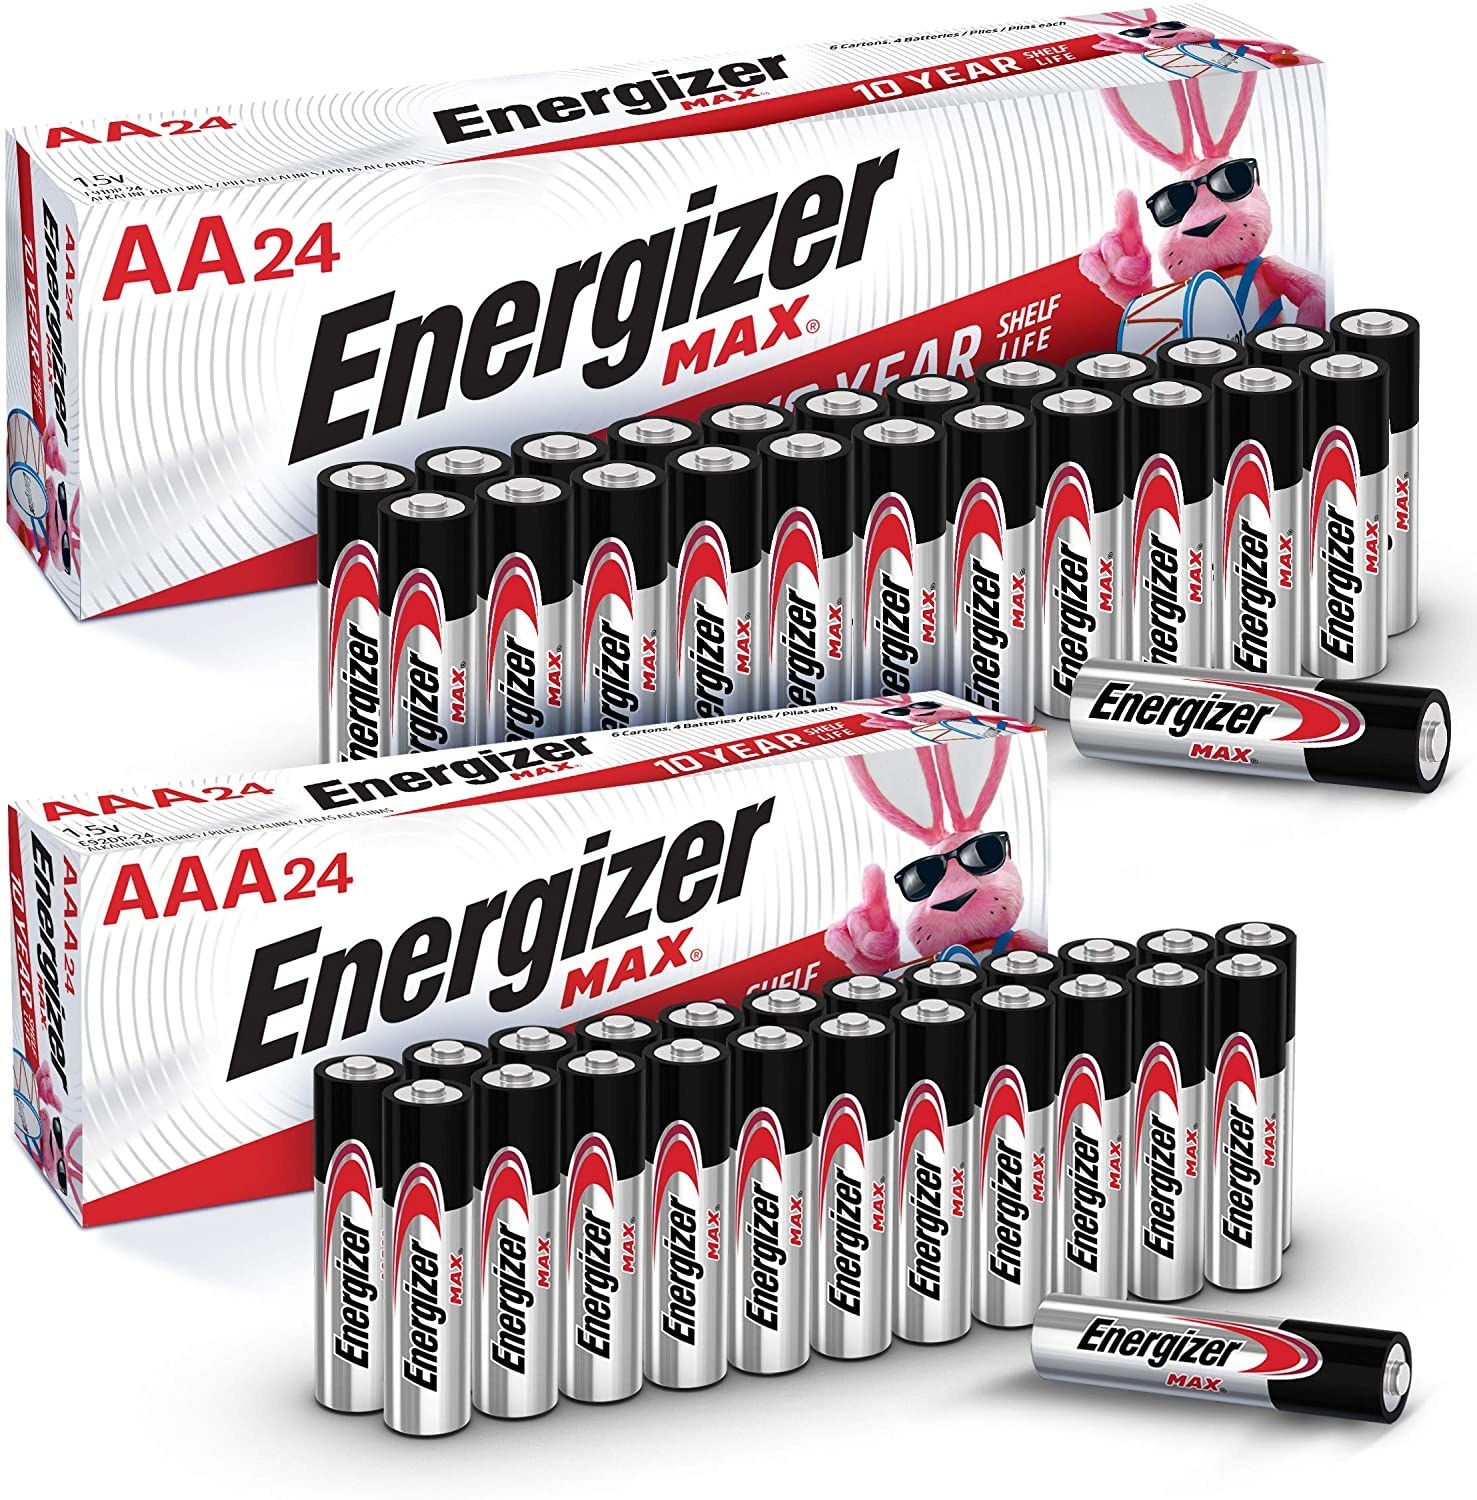 the combo pack of Energizer Max AA and AAA batteries